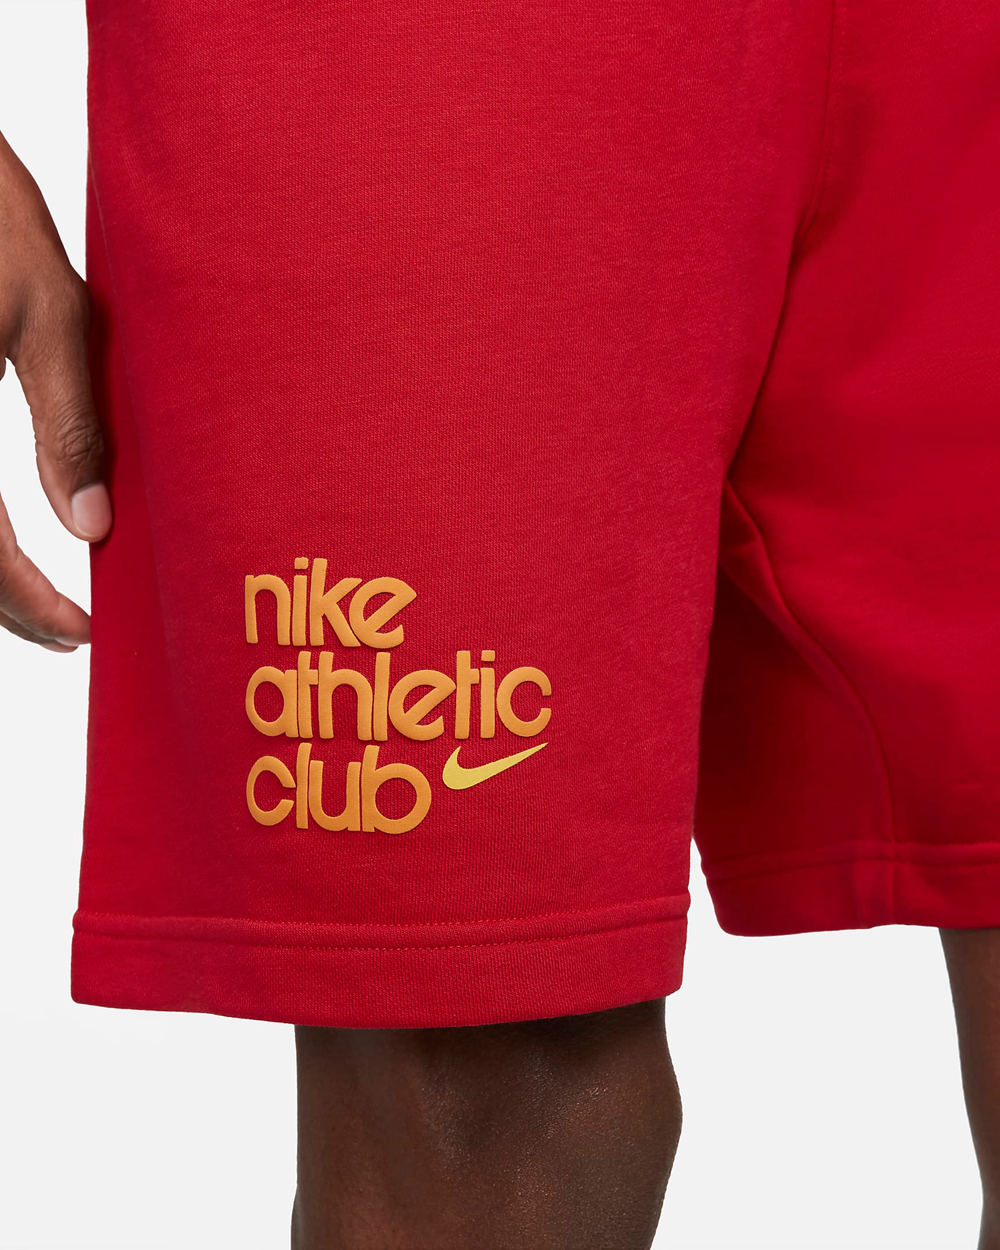 nike-athletic-club-shorts-red-yellow-3